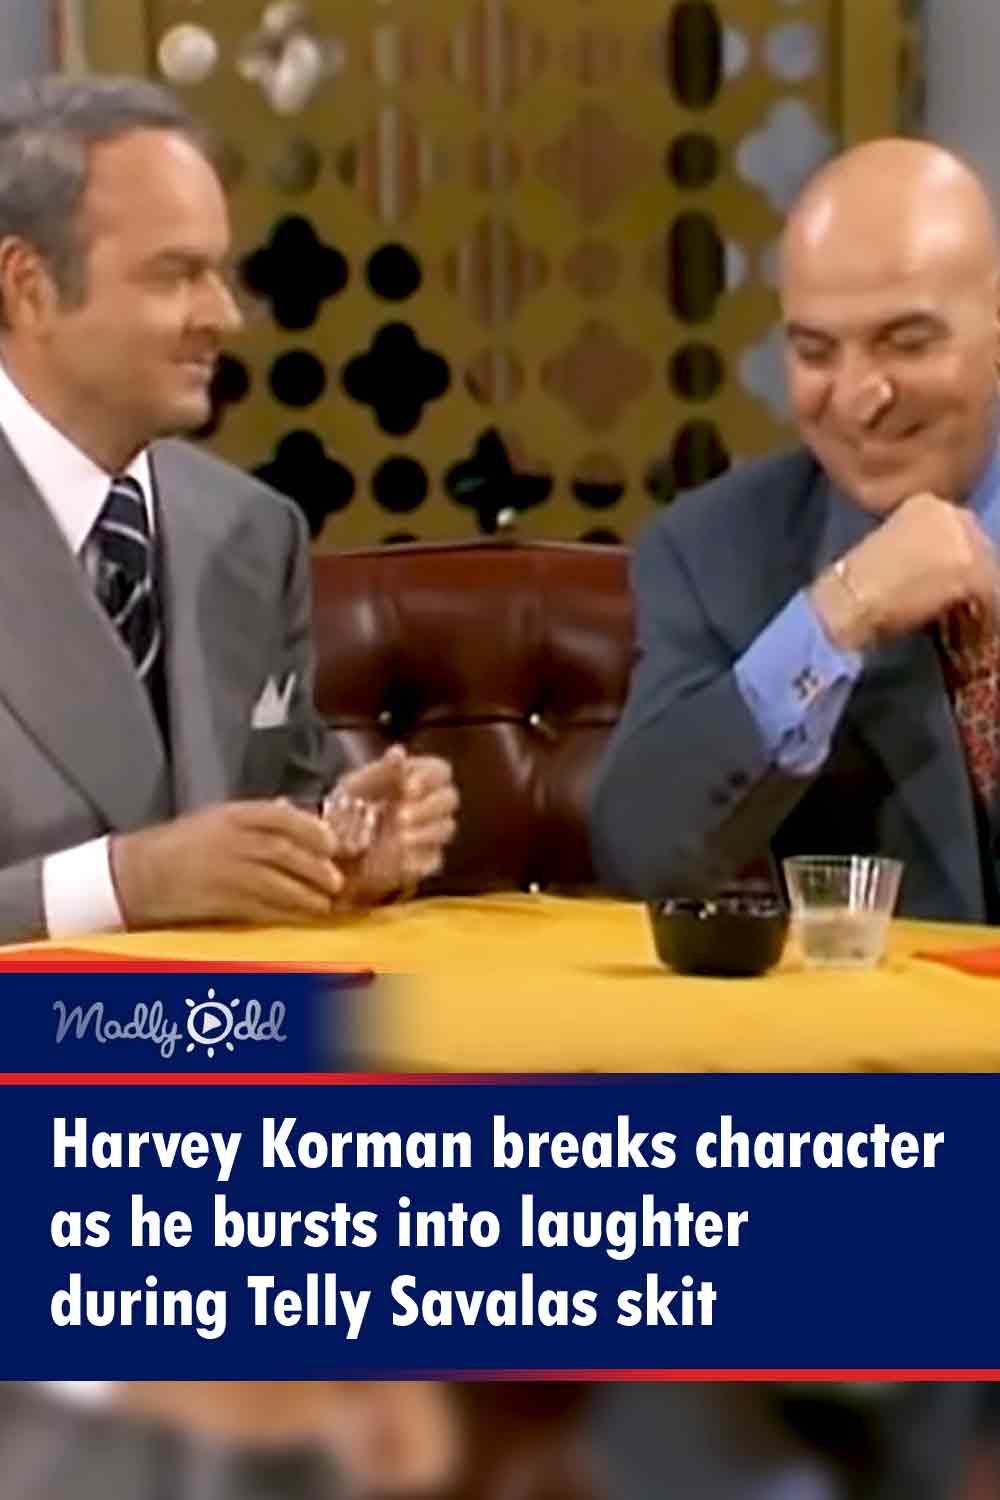 Harvey Korman breaks character as he bursts into laughter during Telly Savalas skit